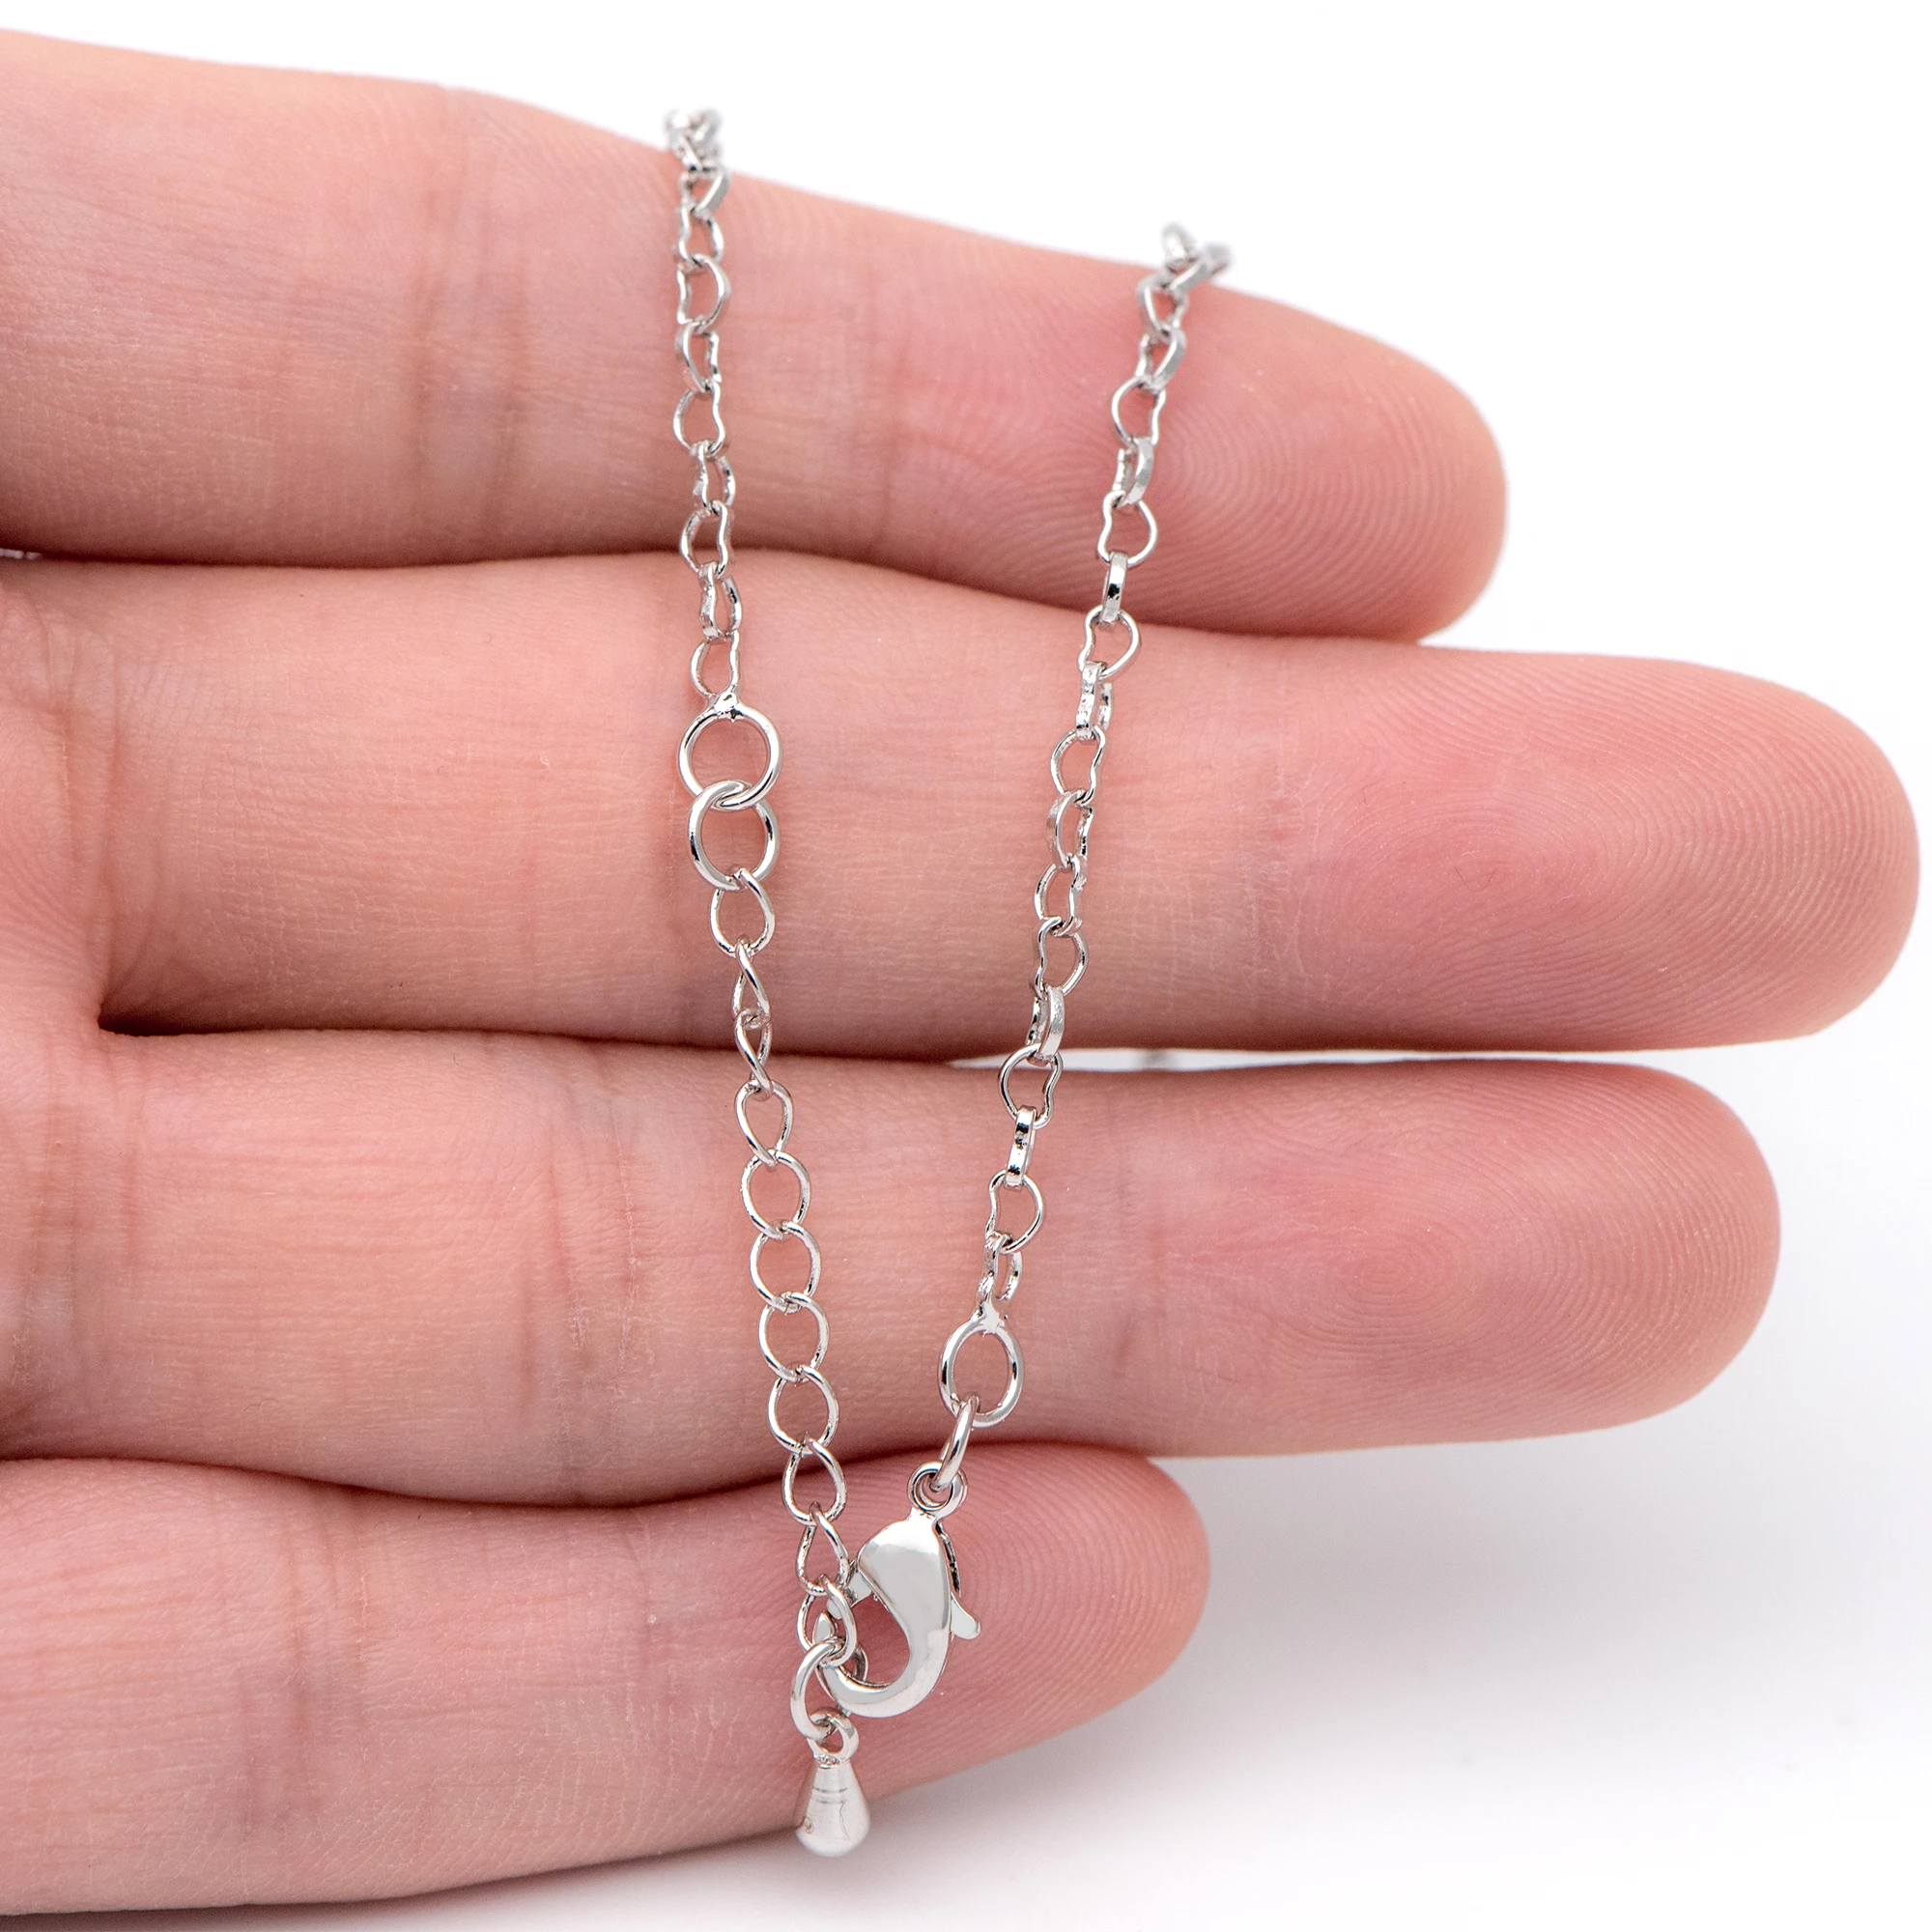 U Pick 1pc Sterling Silver Chain Extender With Heart Pendant 